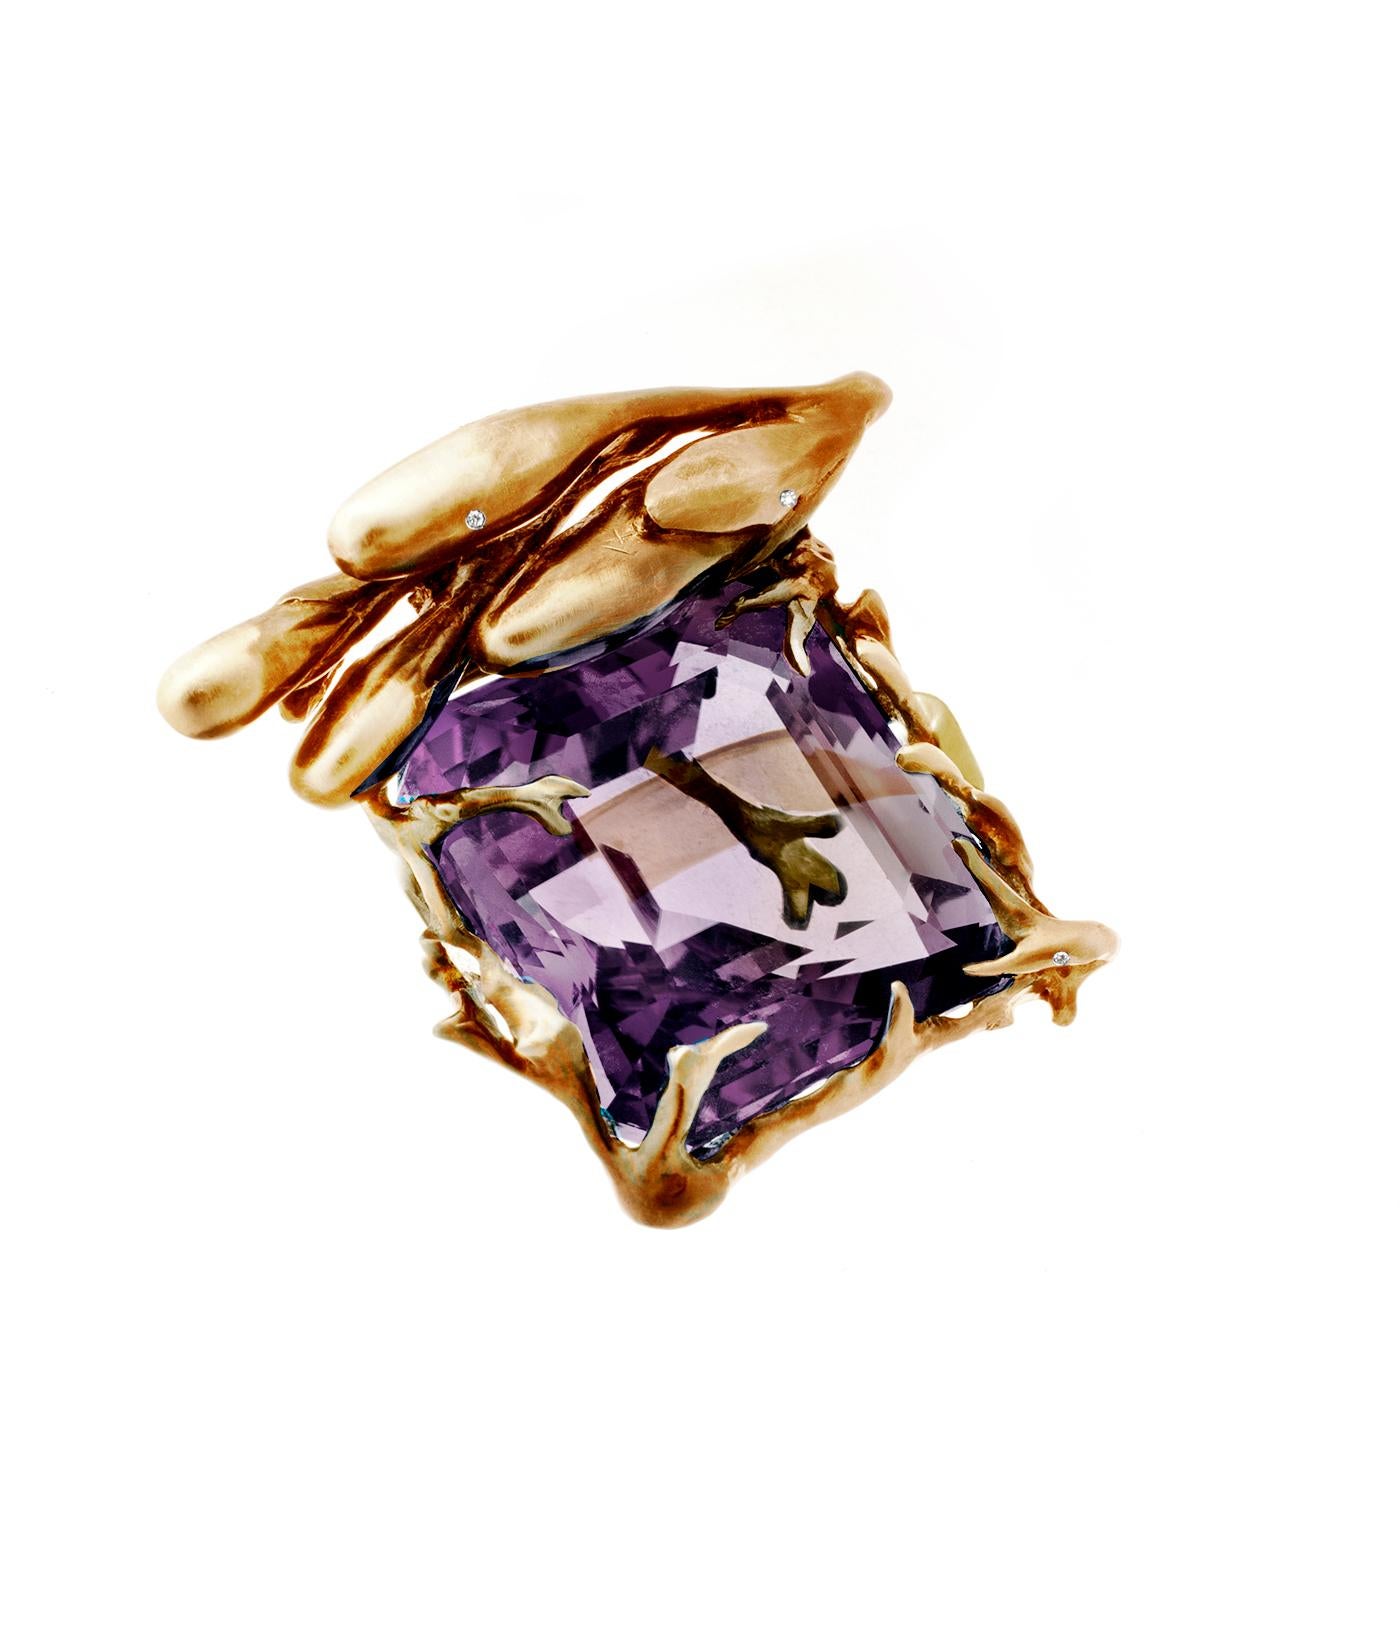 This Fairy Tale ring in 18 karat rose gold with diamonds and huge amethyst (cushion cut) was featured in Vogue UA published issue (in the version with the blue topaz). It is a jewellery by artist, designed by the oil painter Polya Medvedeva, who's